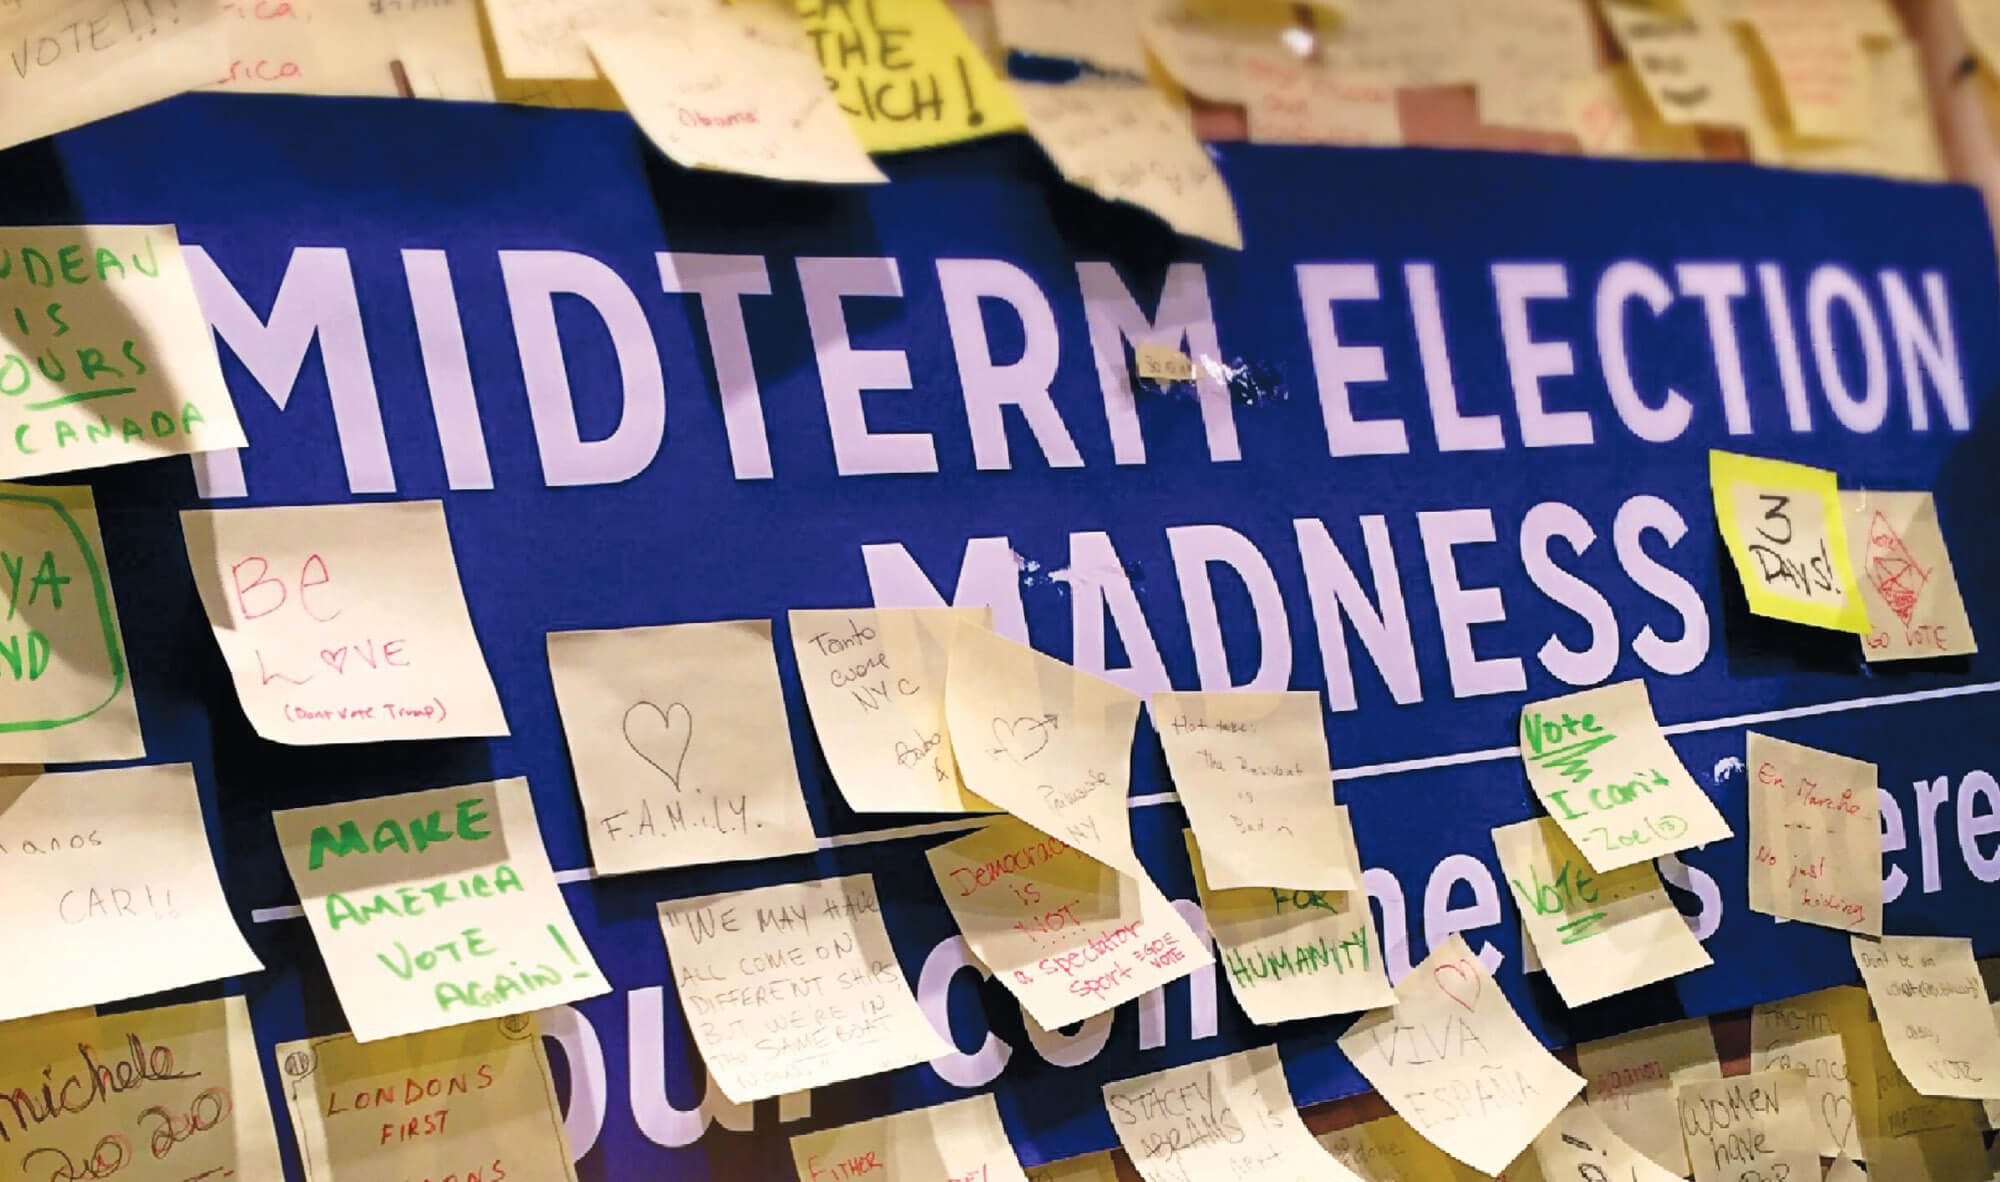 Post-It notes on a board reading Midterm Election Madness.